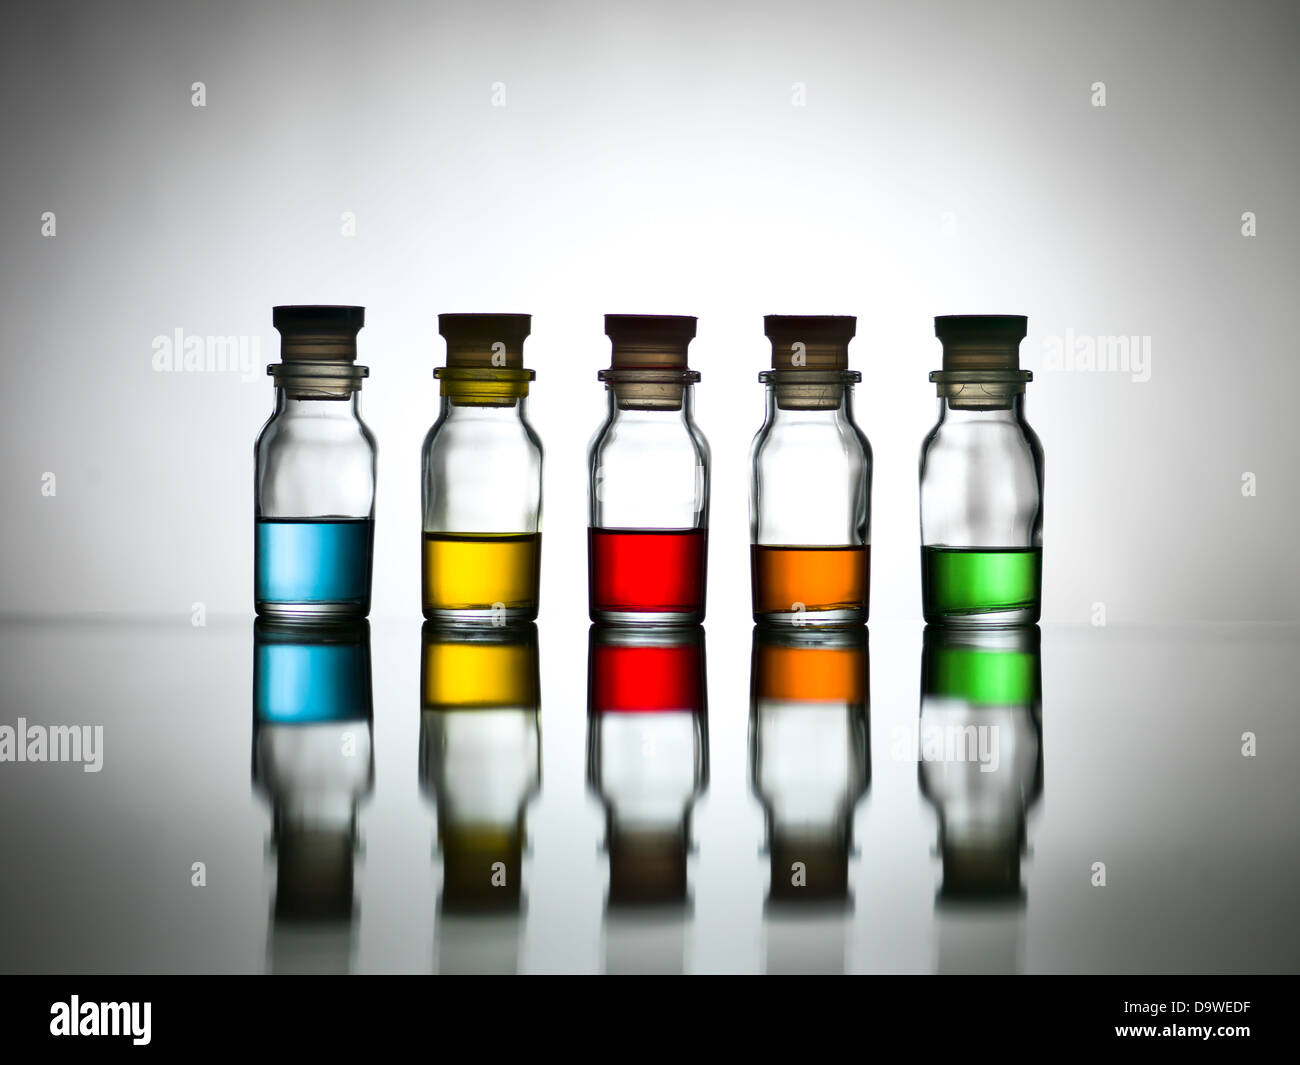 Five bottles with diverse colors of content reflected on a table Stock Photo